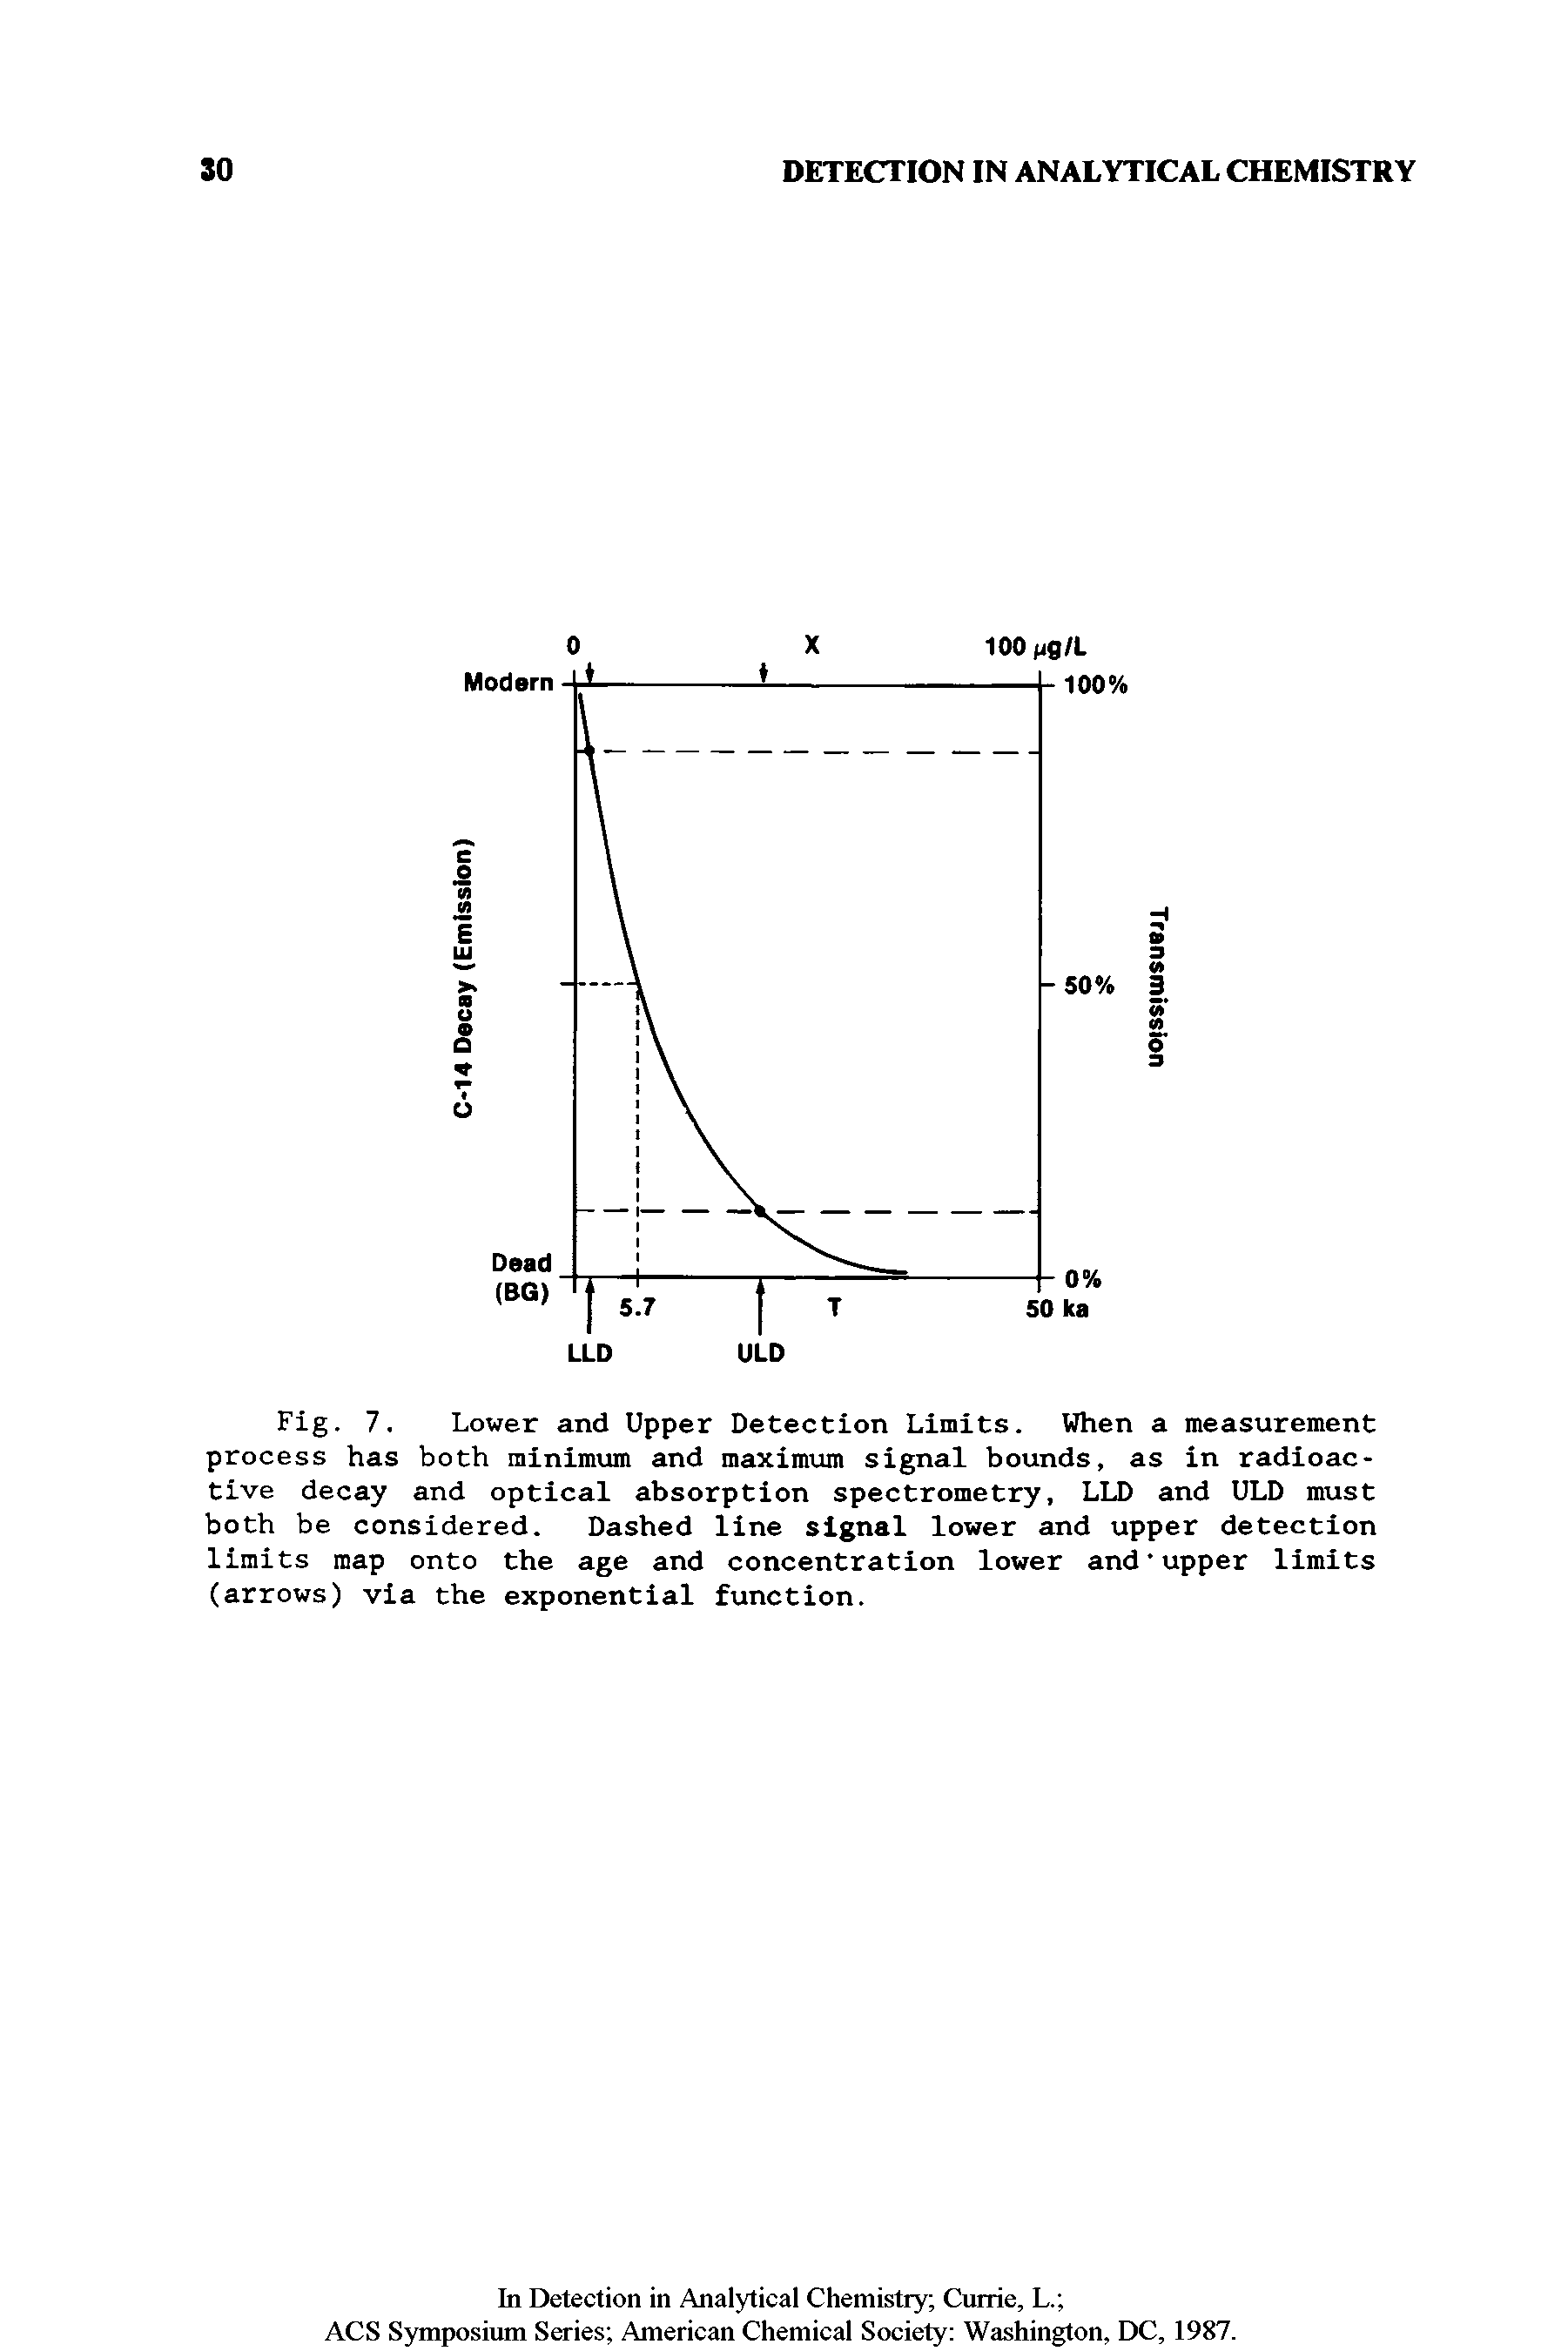 Fig. 7. Lower and Upper Detection Limits. When a measurement process has both minimum and maximum signal bounds, as in radioactive decay and optical absorption spectrometry, LLD and ULD must both be considered. Dashed line signal lower and upper detection limits map onto the age and concentration lower and upper limits (arrows) via the exponential function.